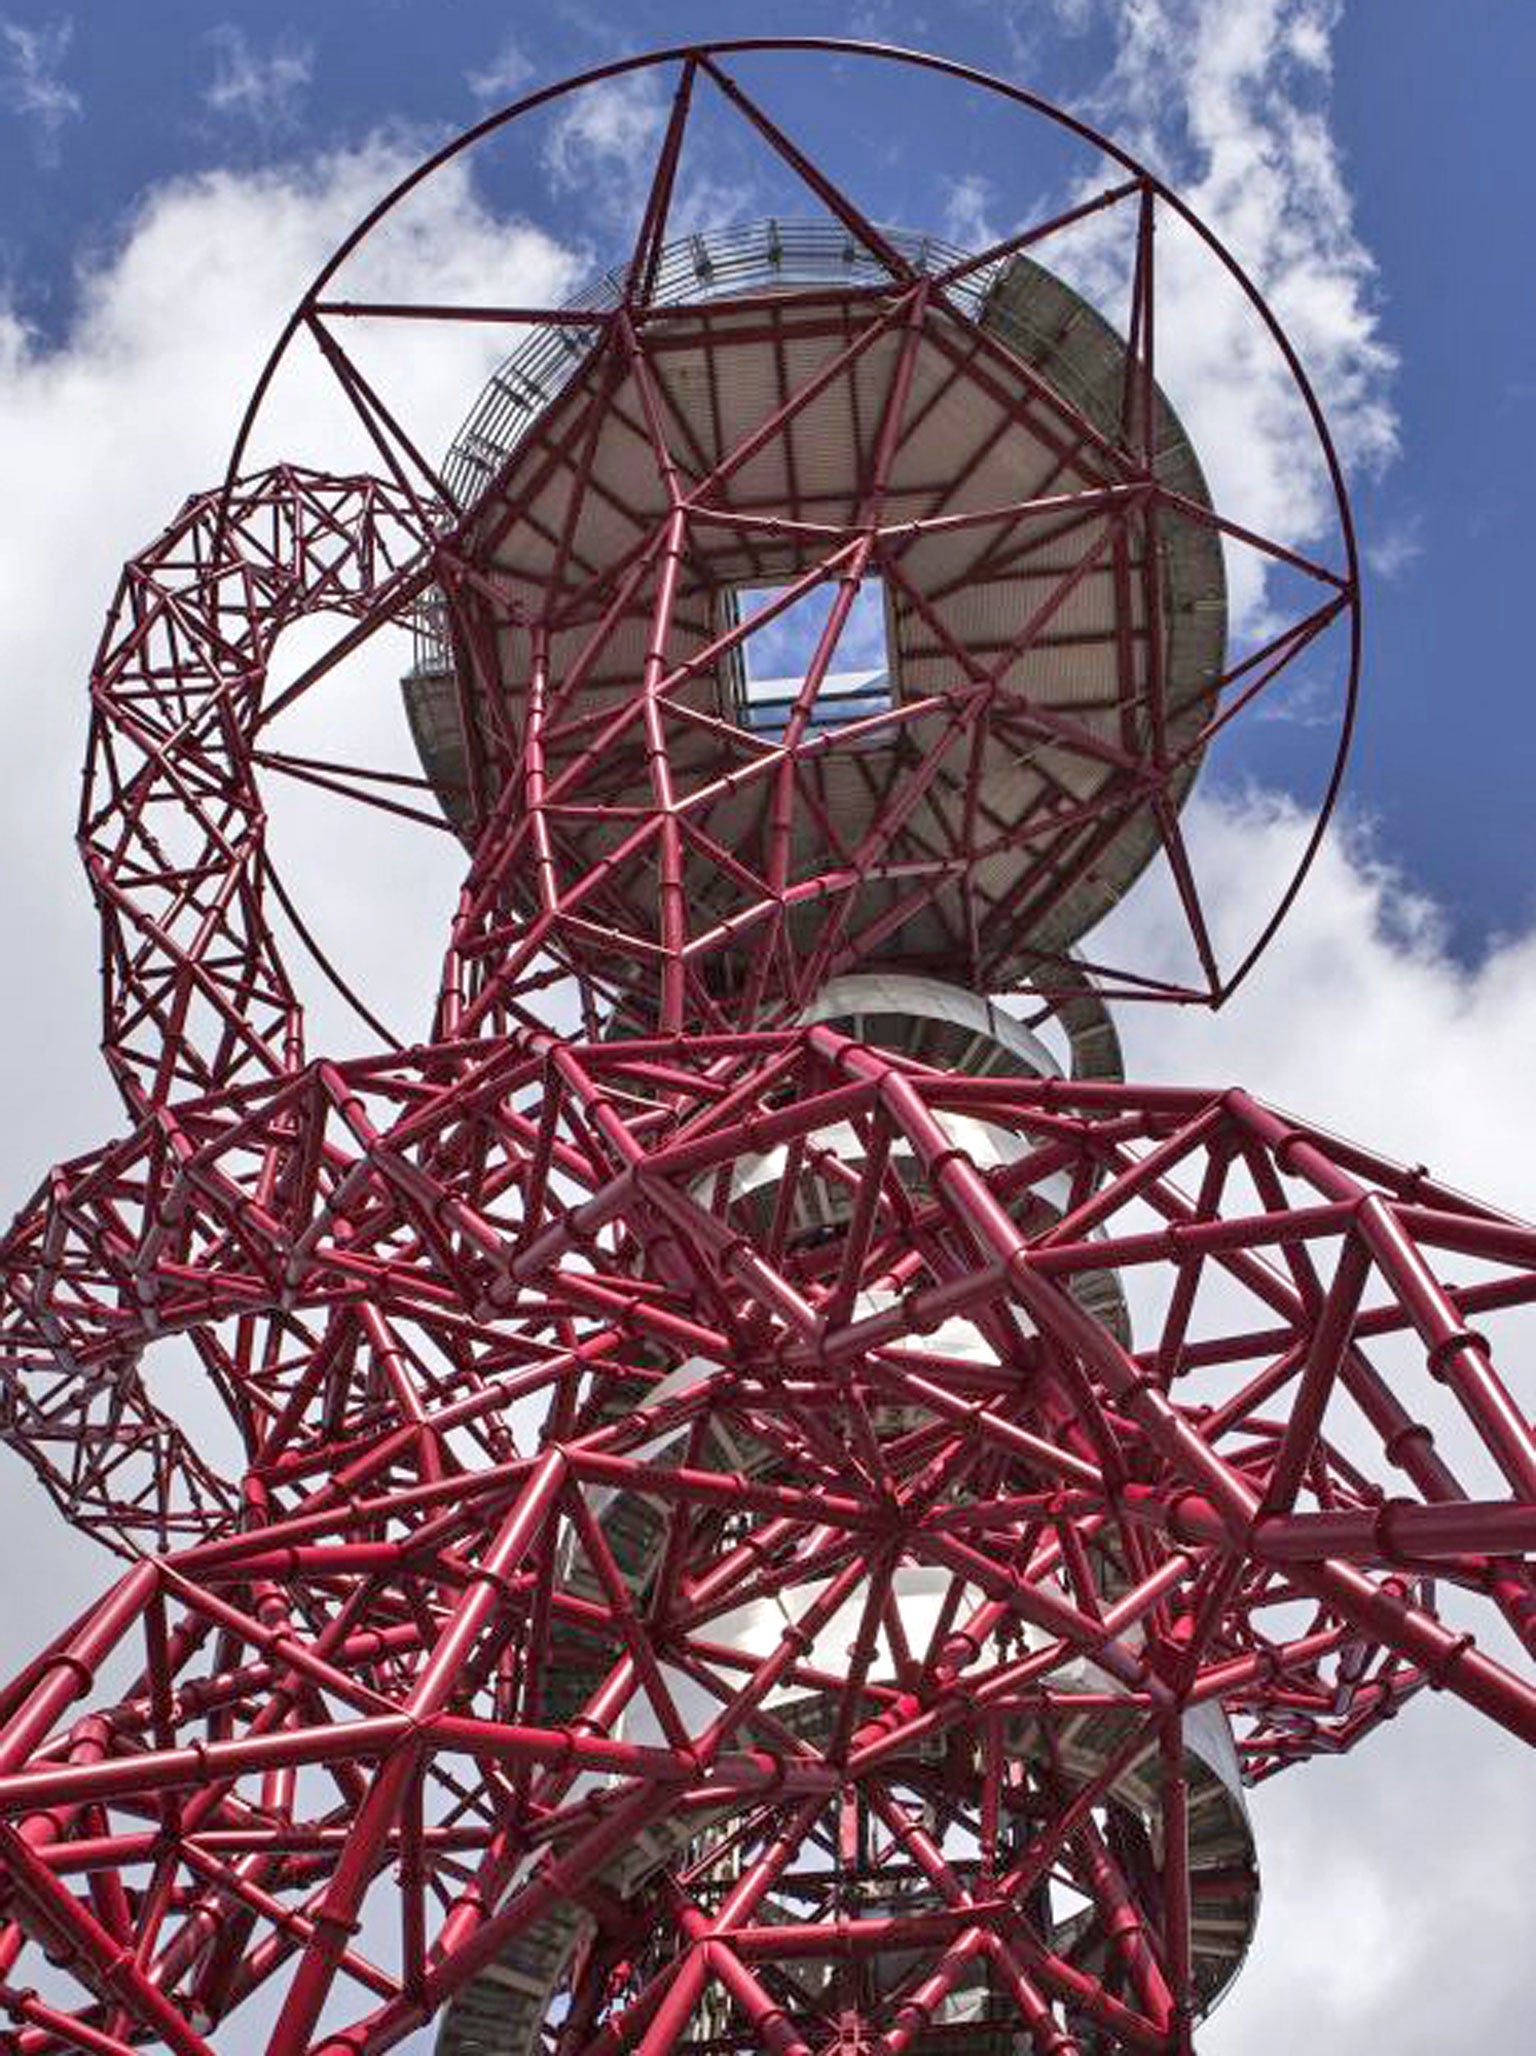 8. Tower power Anish Kapoor's tangled red sculpture, the ArcelorMittal Orbit, re-opens to the public today in the Queen Elizabeth Olympic Park. The attraction, which became an icon of the 2012 Olympic Games, will launch with an aerial performance, Taiko drummers, creative workshops and a parade. Visitors can soak up the carnival atmosphere and ascend to the viewing platform; £15. arcelormittalorbit.com